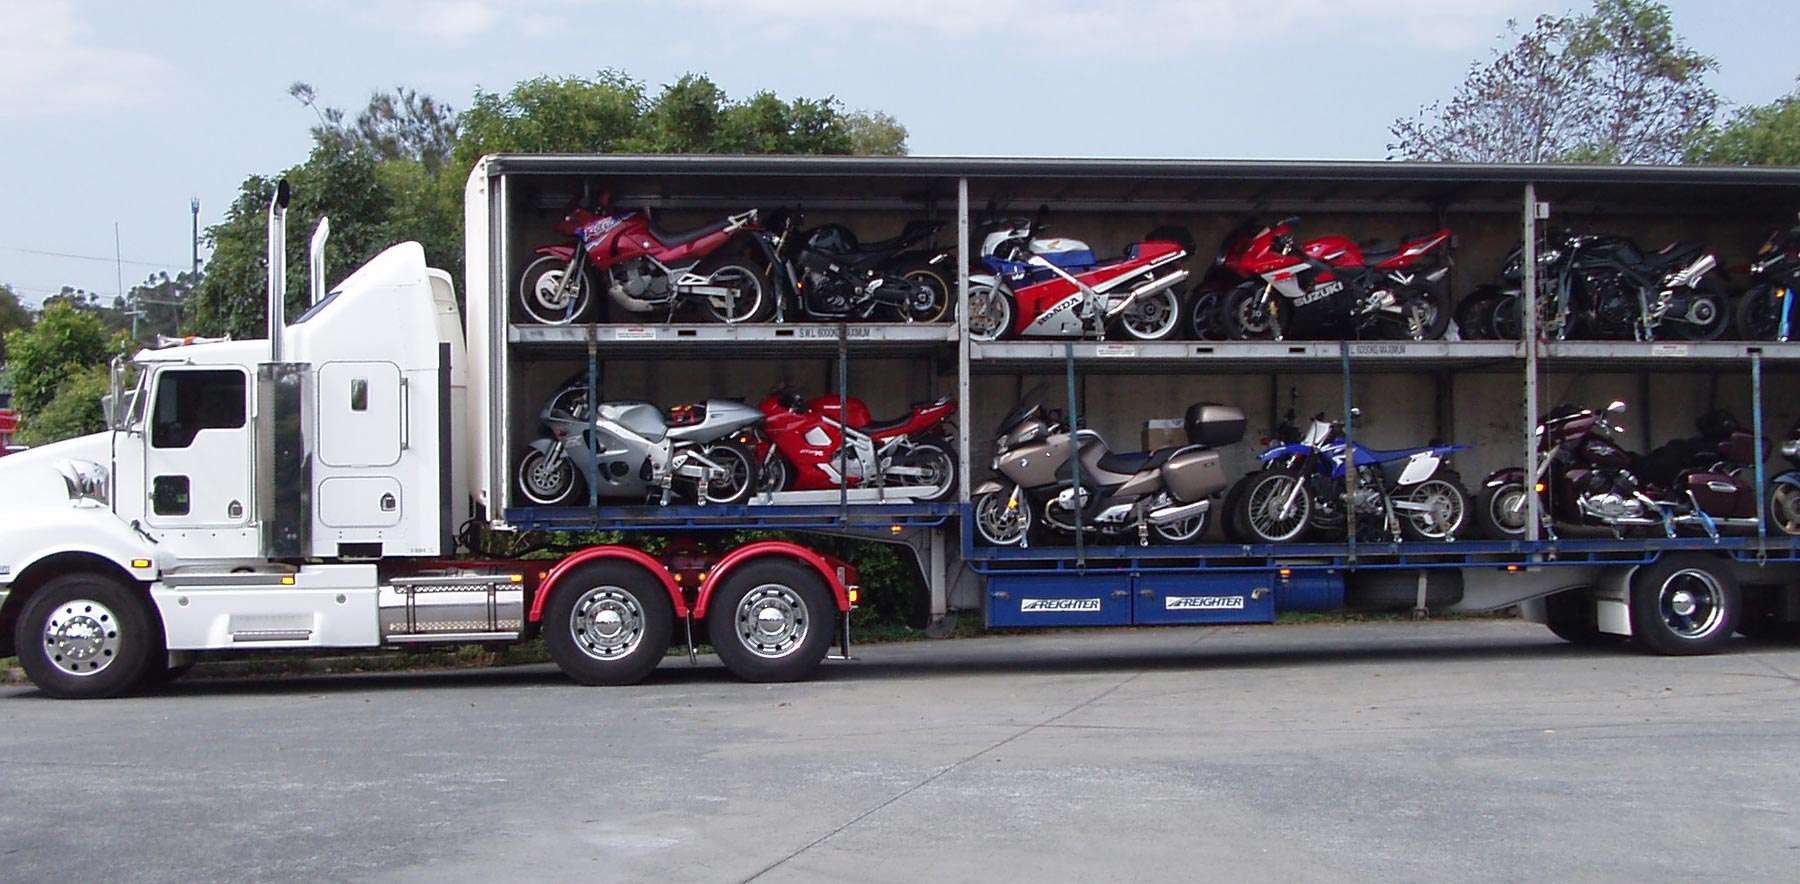 Many motorcycles in a transport trailer